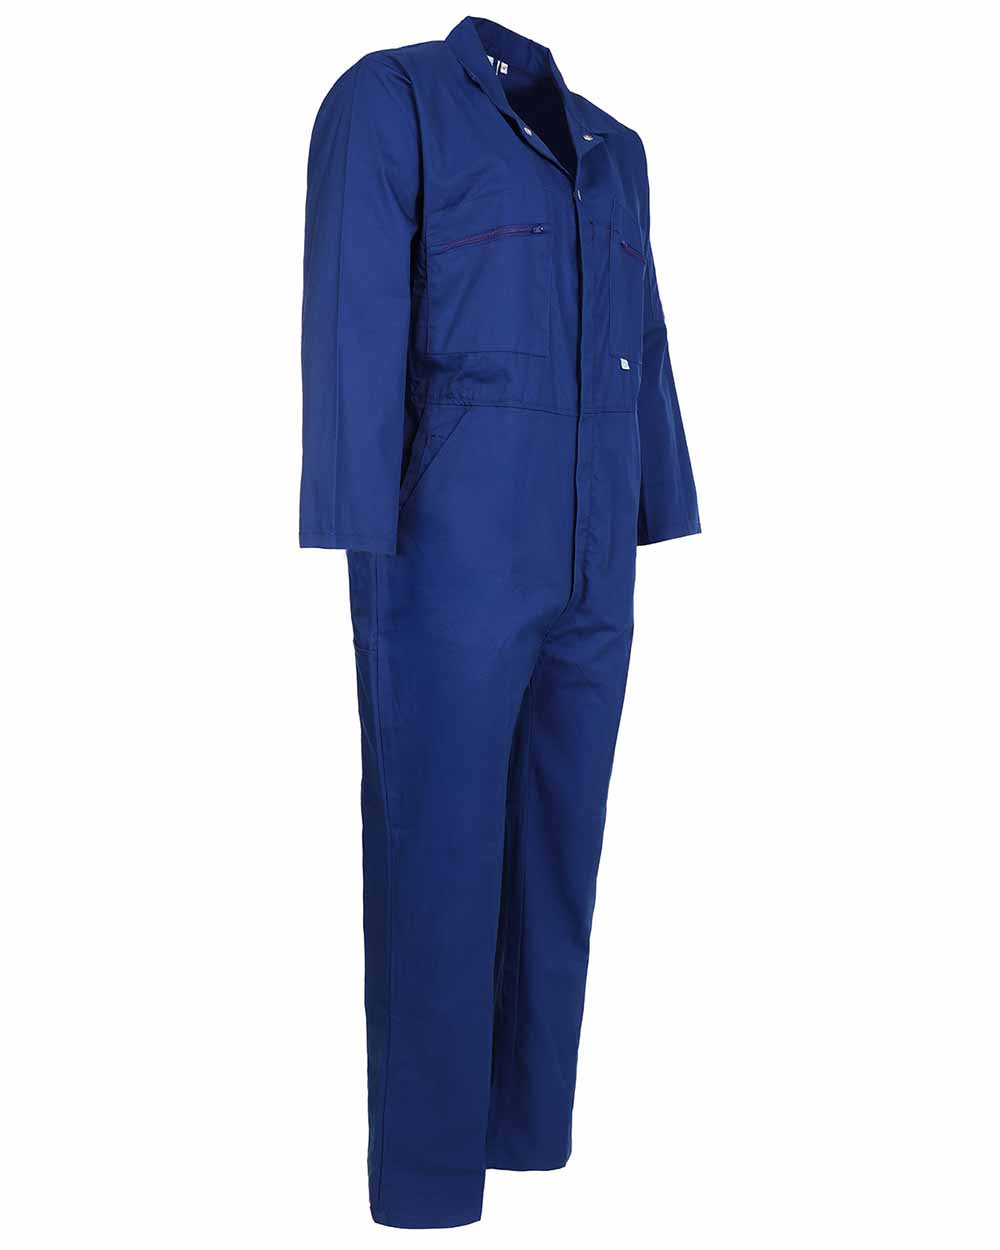 Zip front detail on Fort Zip Front Boilersuit in Royal Blue 